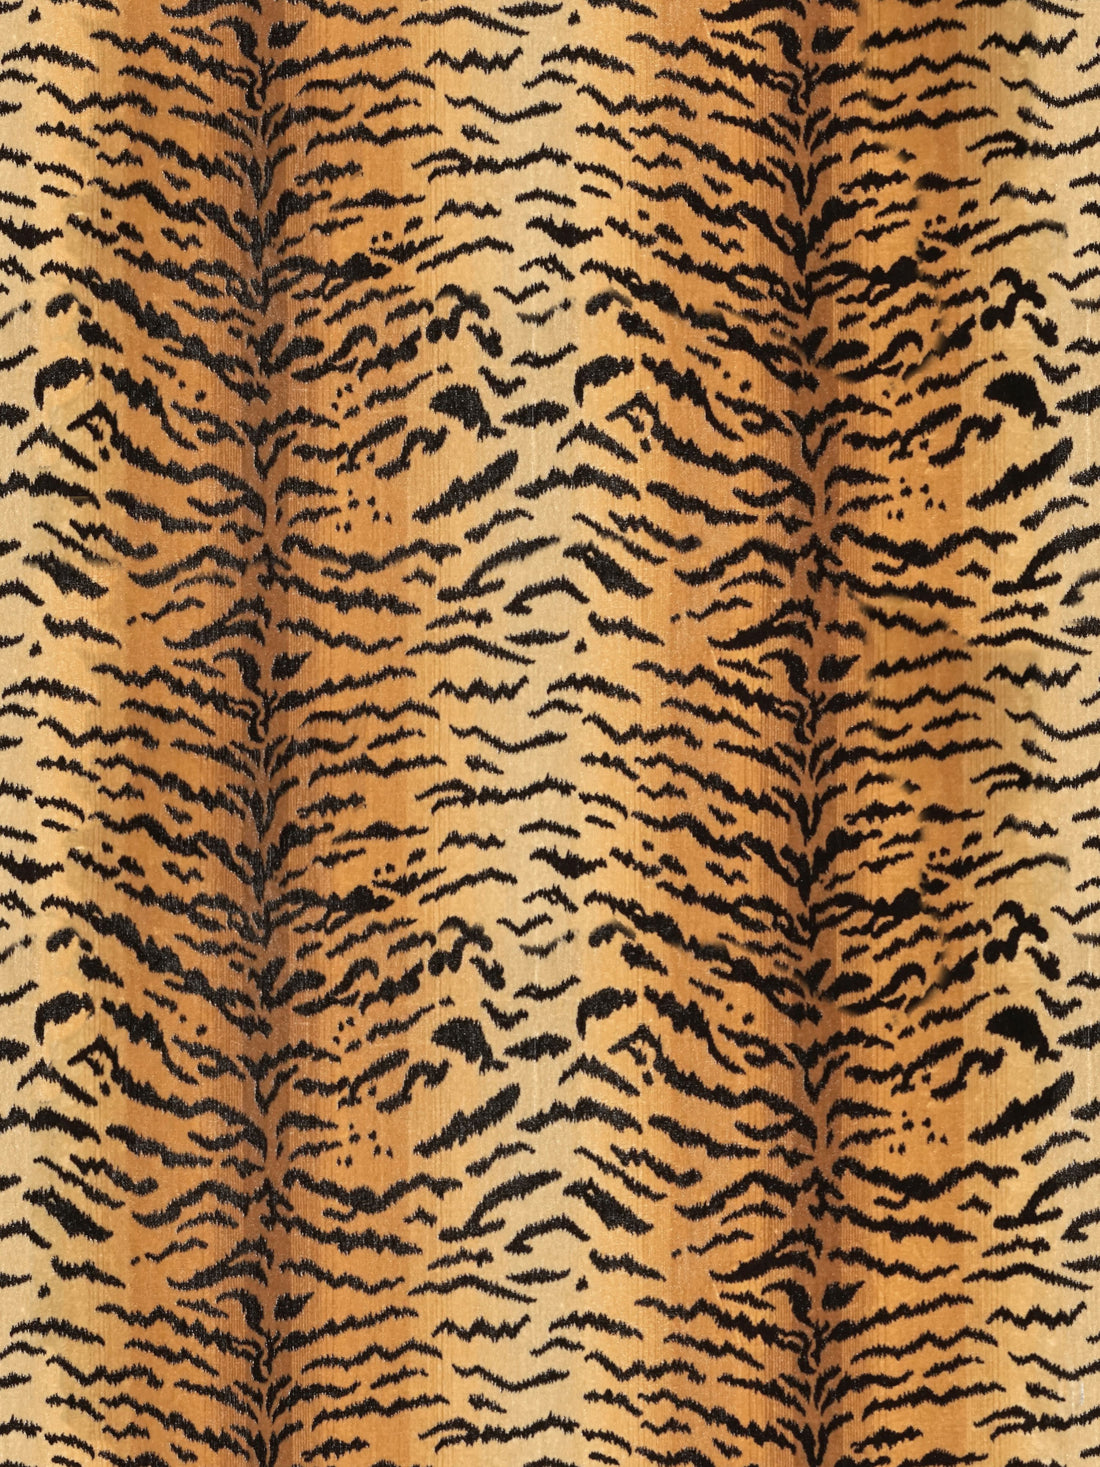 Tigre Silk fabric in ivory, gold and black color - pattern number SC 000126167MM - by Scalamandre in the Scalamandre Fabrics Book 1 collection